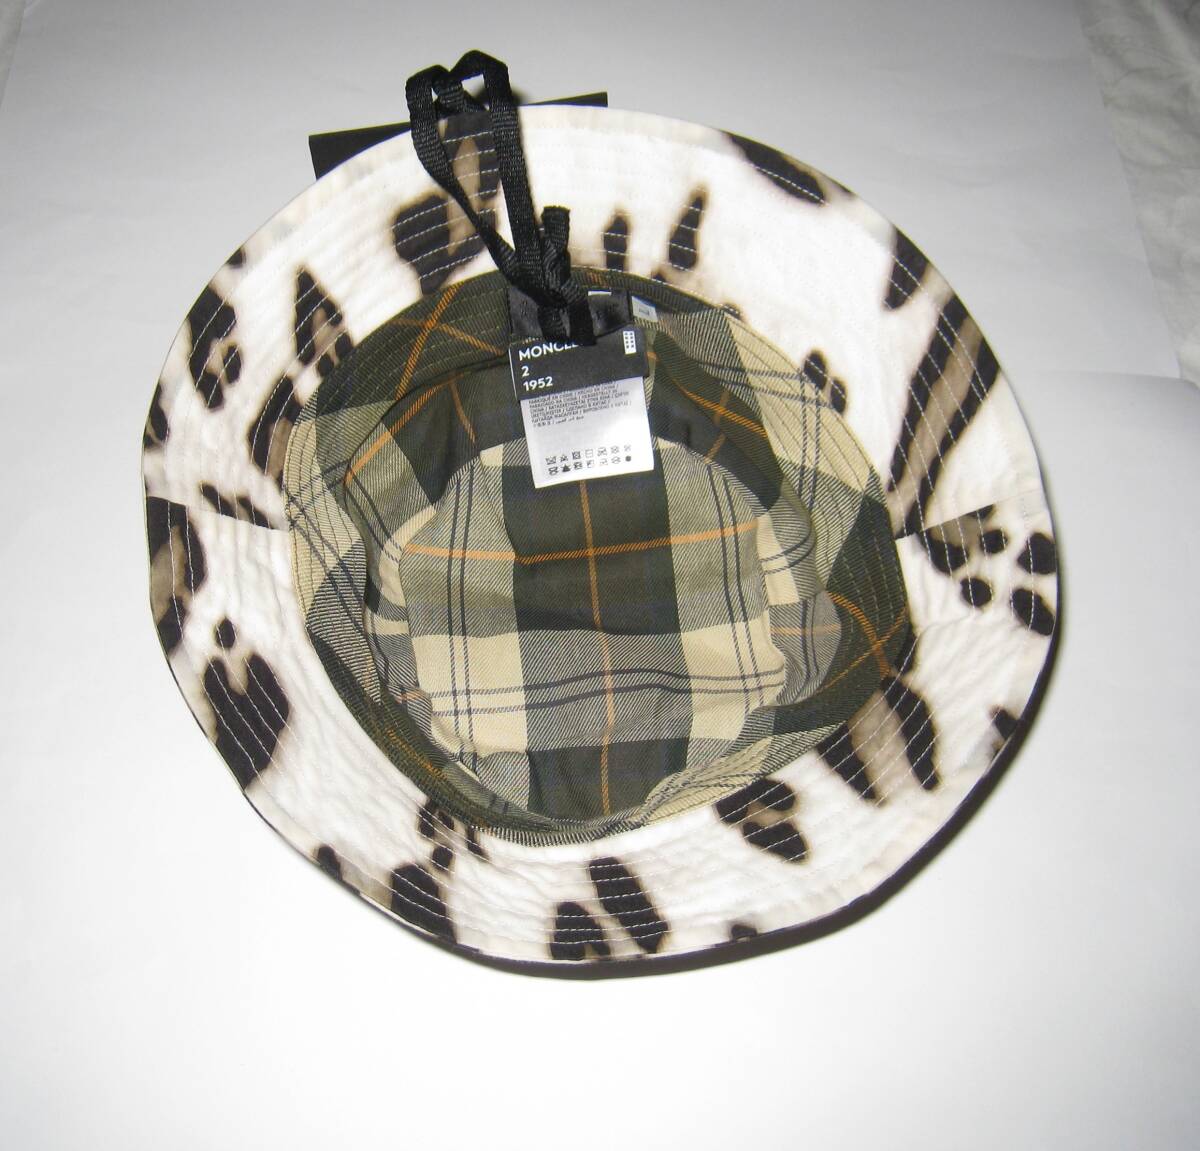 MONCLER GENIUS 7 MONCLER x Barbour Bucket Hat Leopard / モンクレール バブアー バケットハット L レオパード 新品 正規の画像6